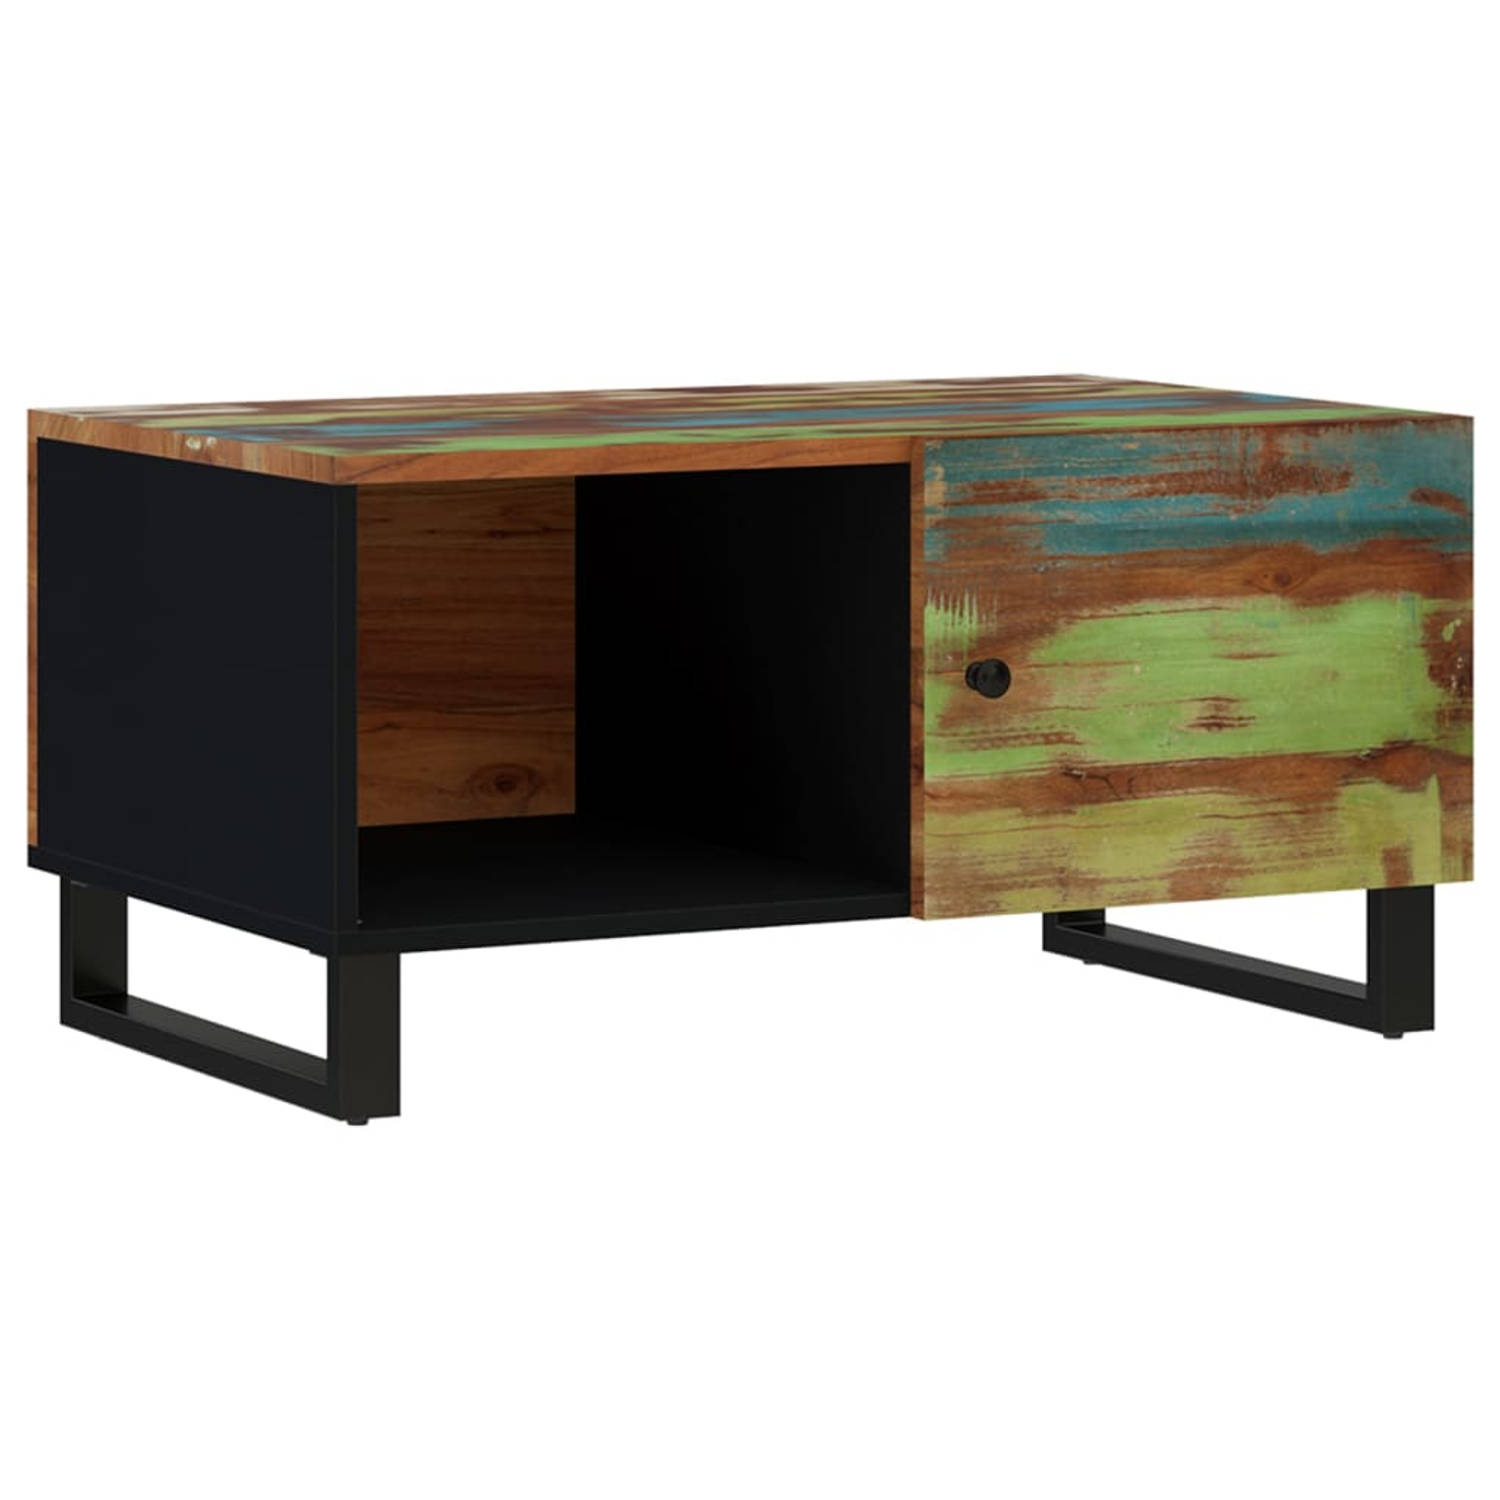 The Living Store Salontafel - Massief gerecycled hout - Multicolor - 80 x 50 x 40 cm